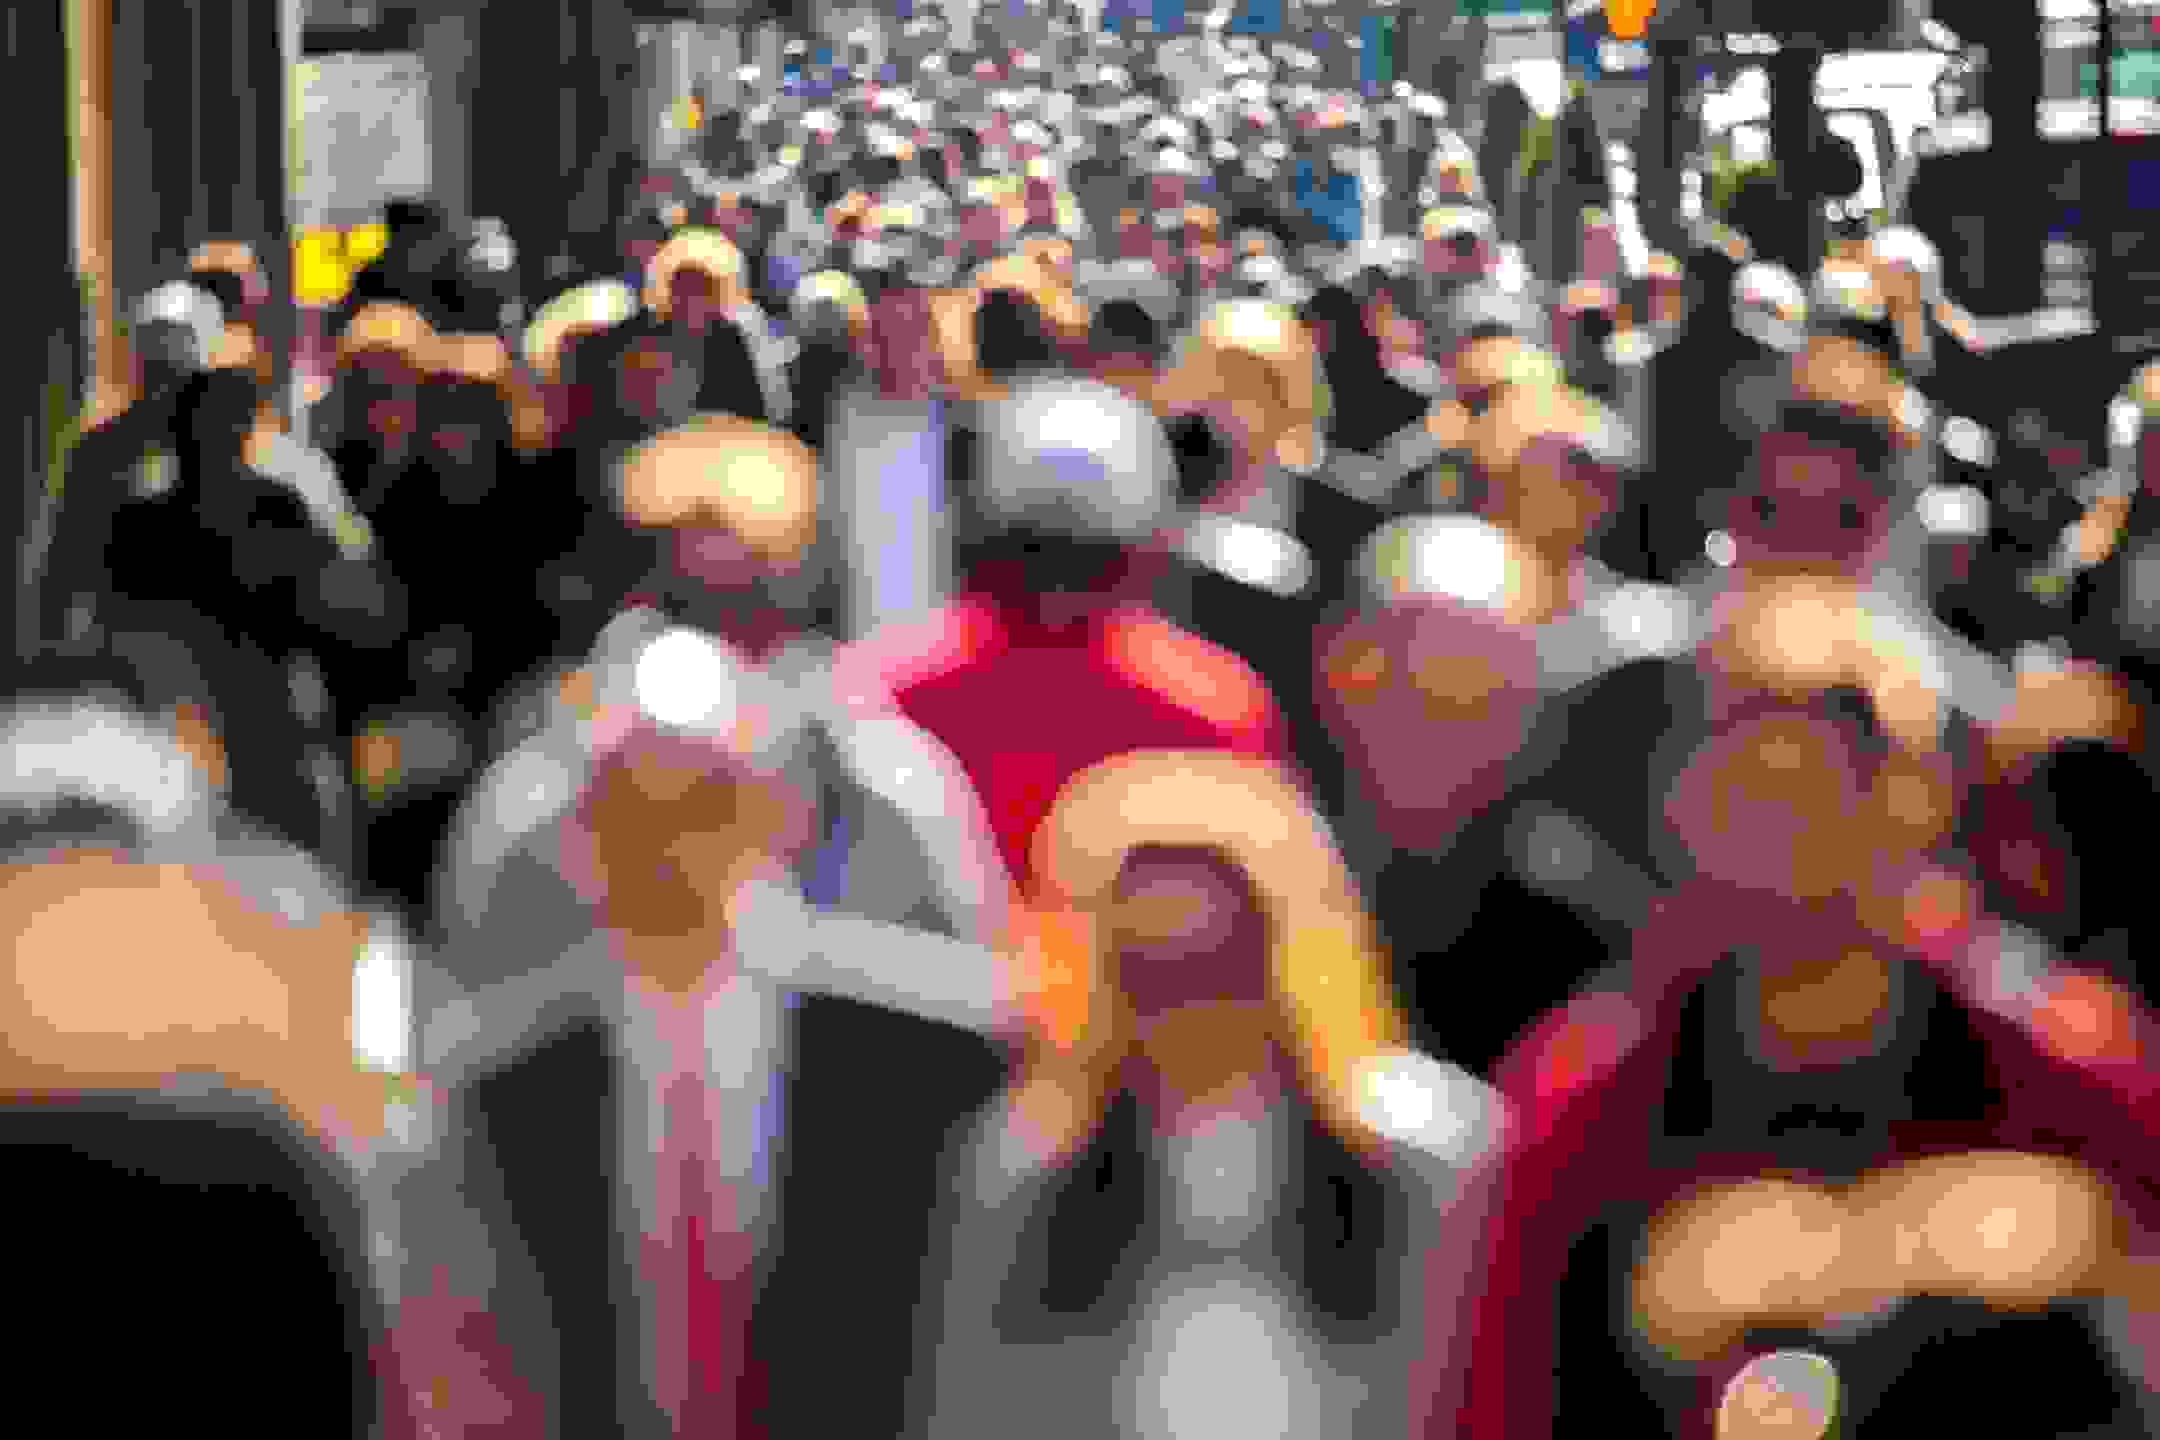 Large crowd commuting to work